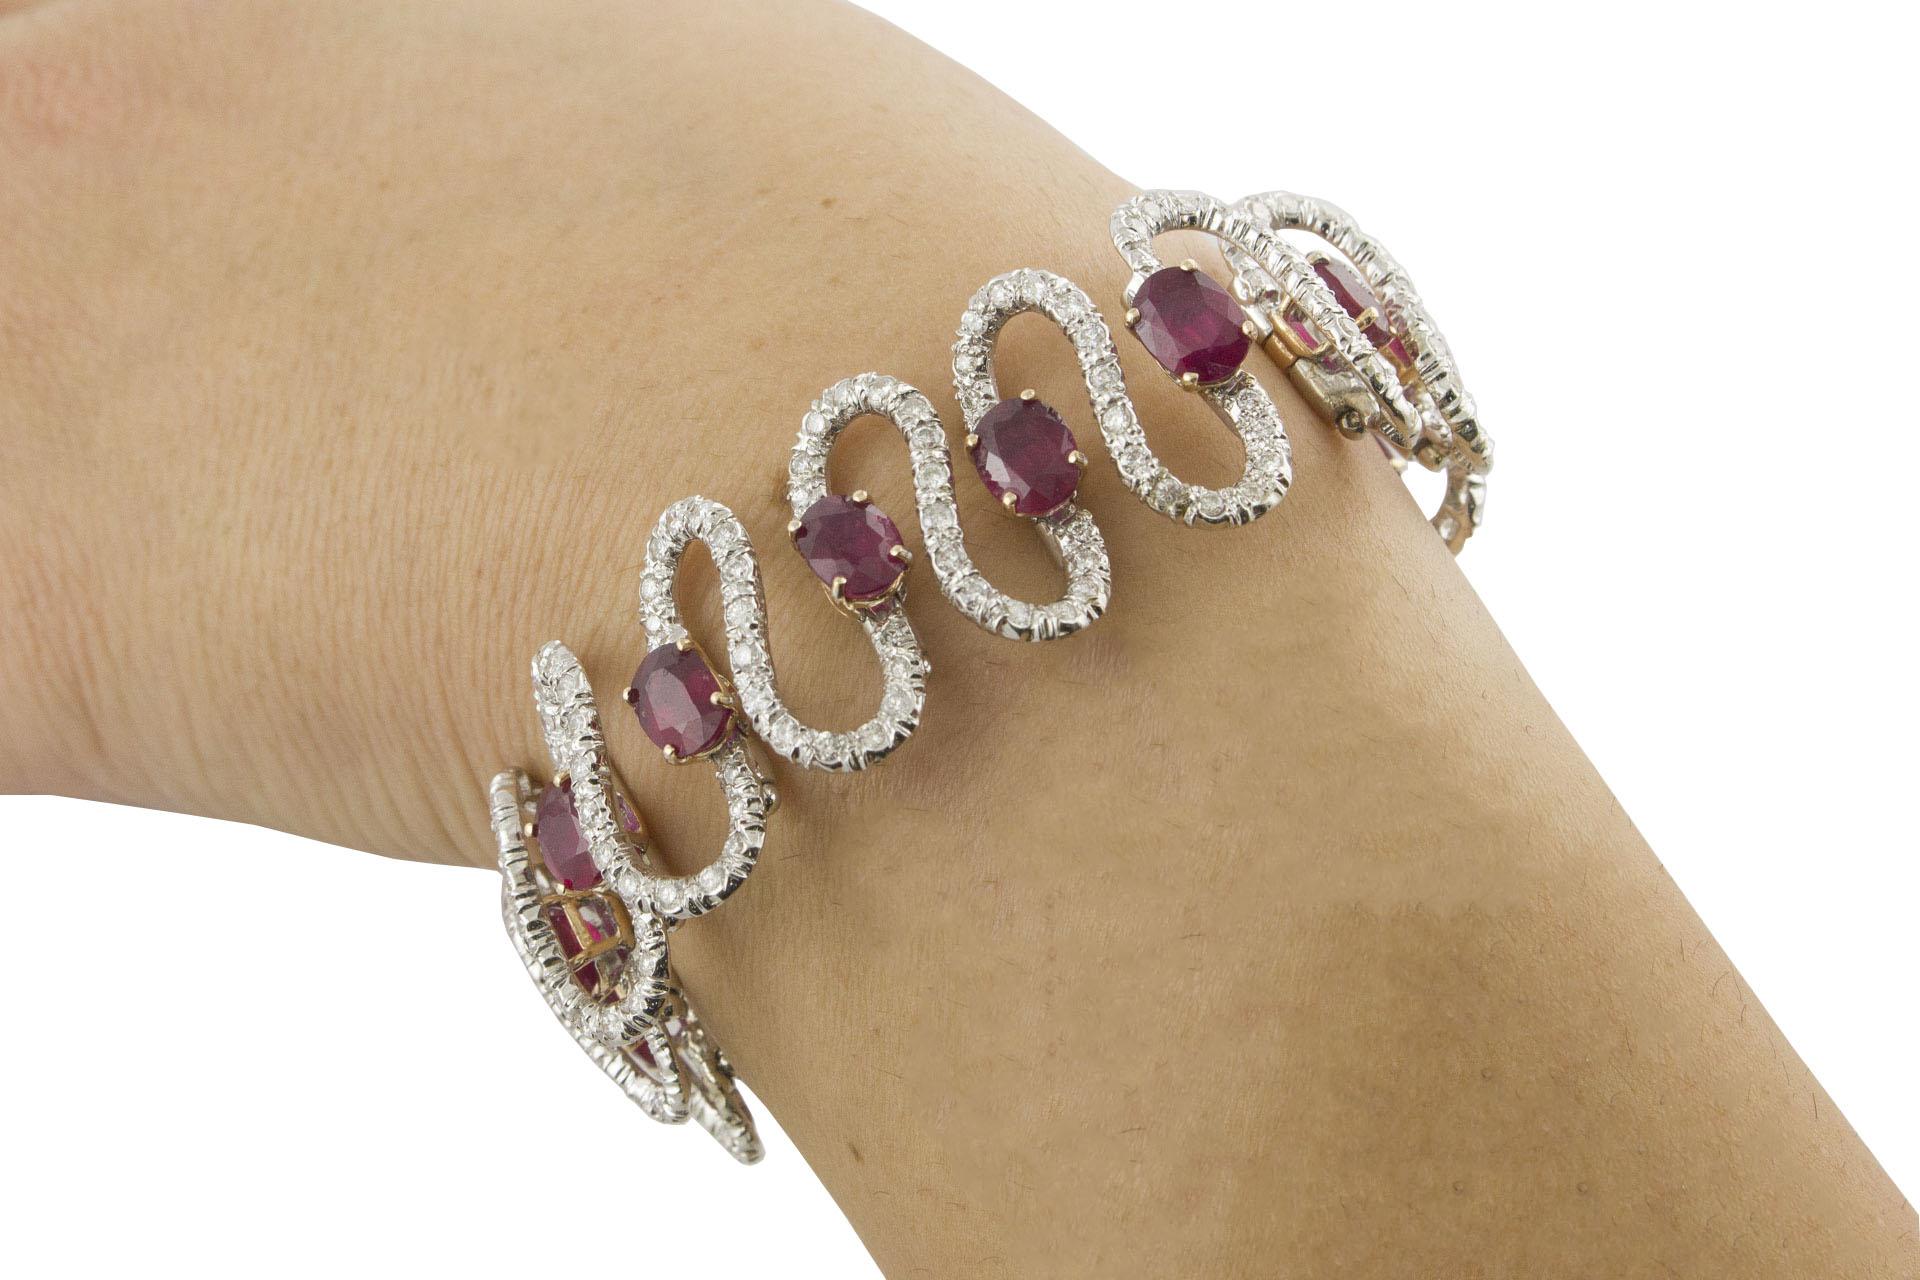 Rubies White Diamonds White and Rose Gold Waves Bracelet For Sale 2